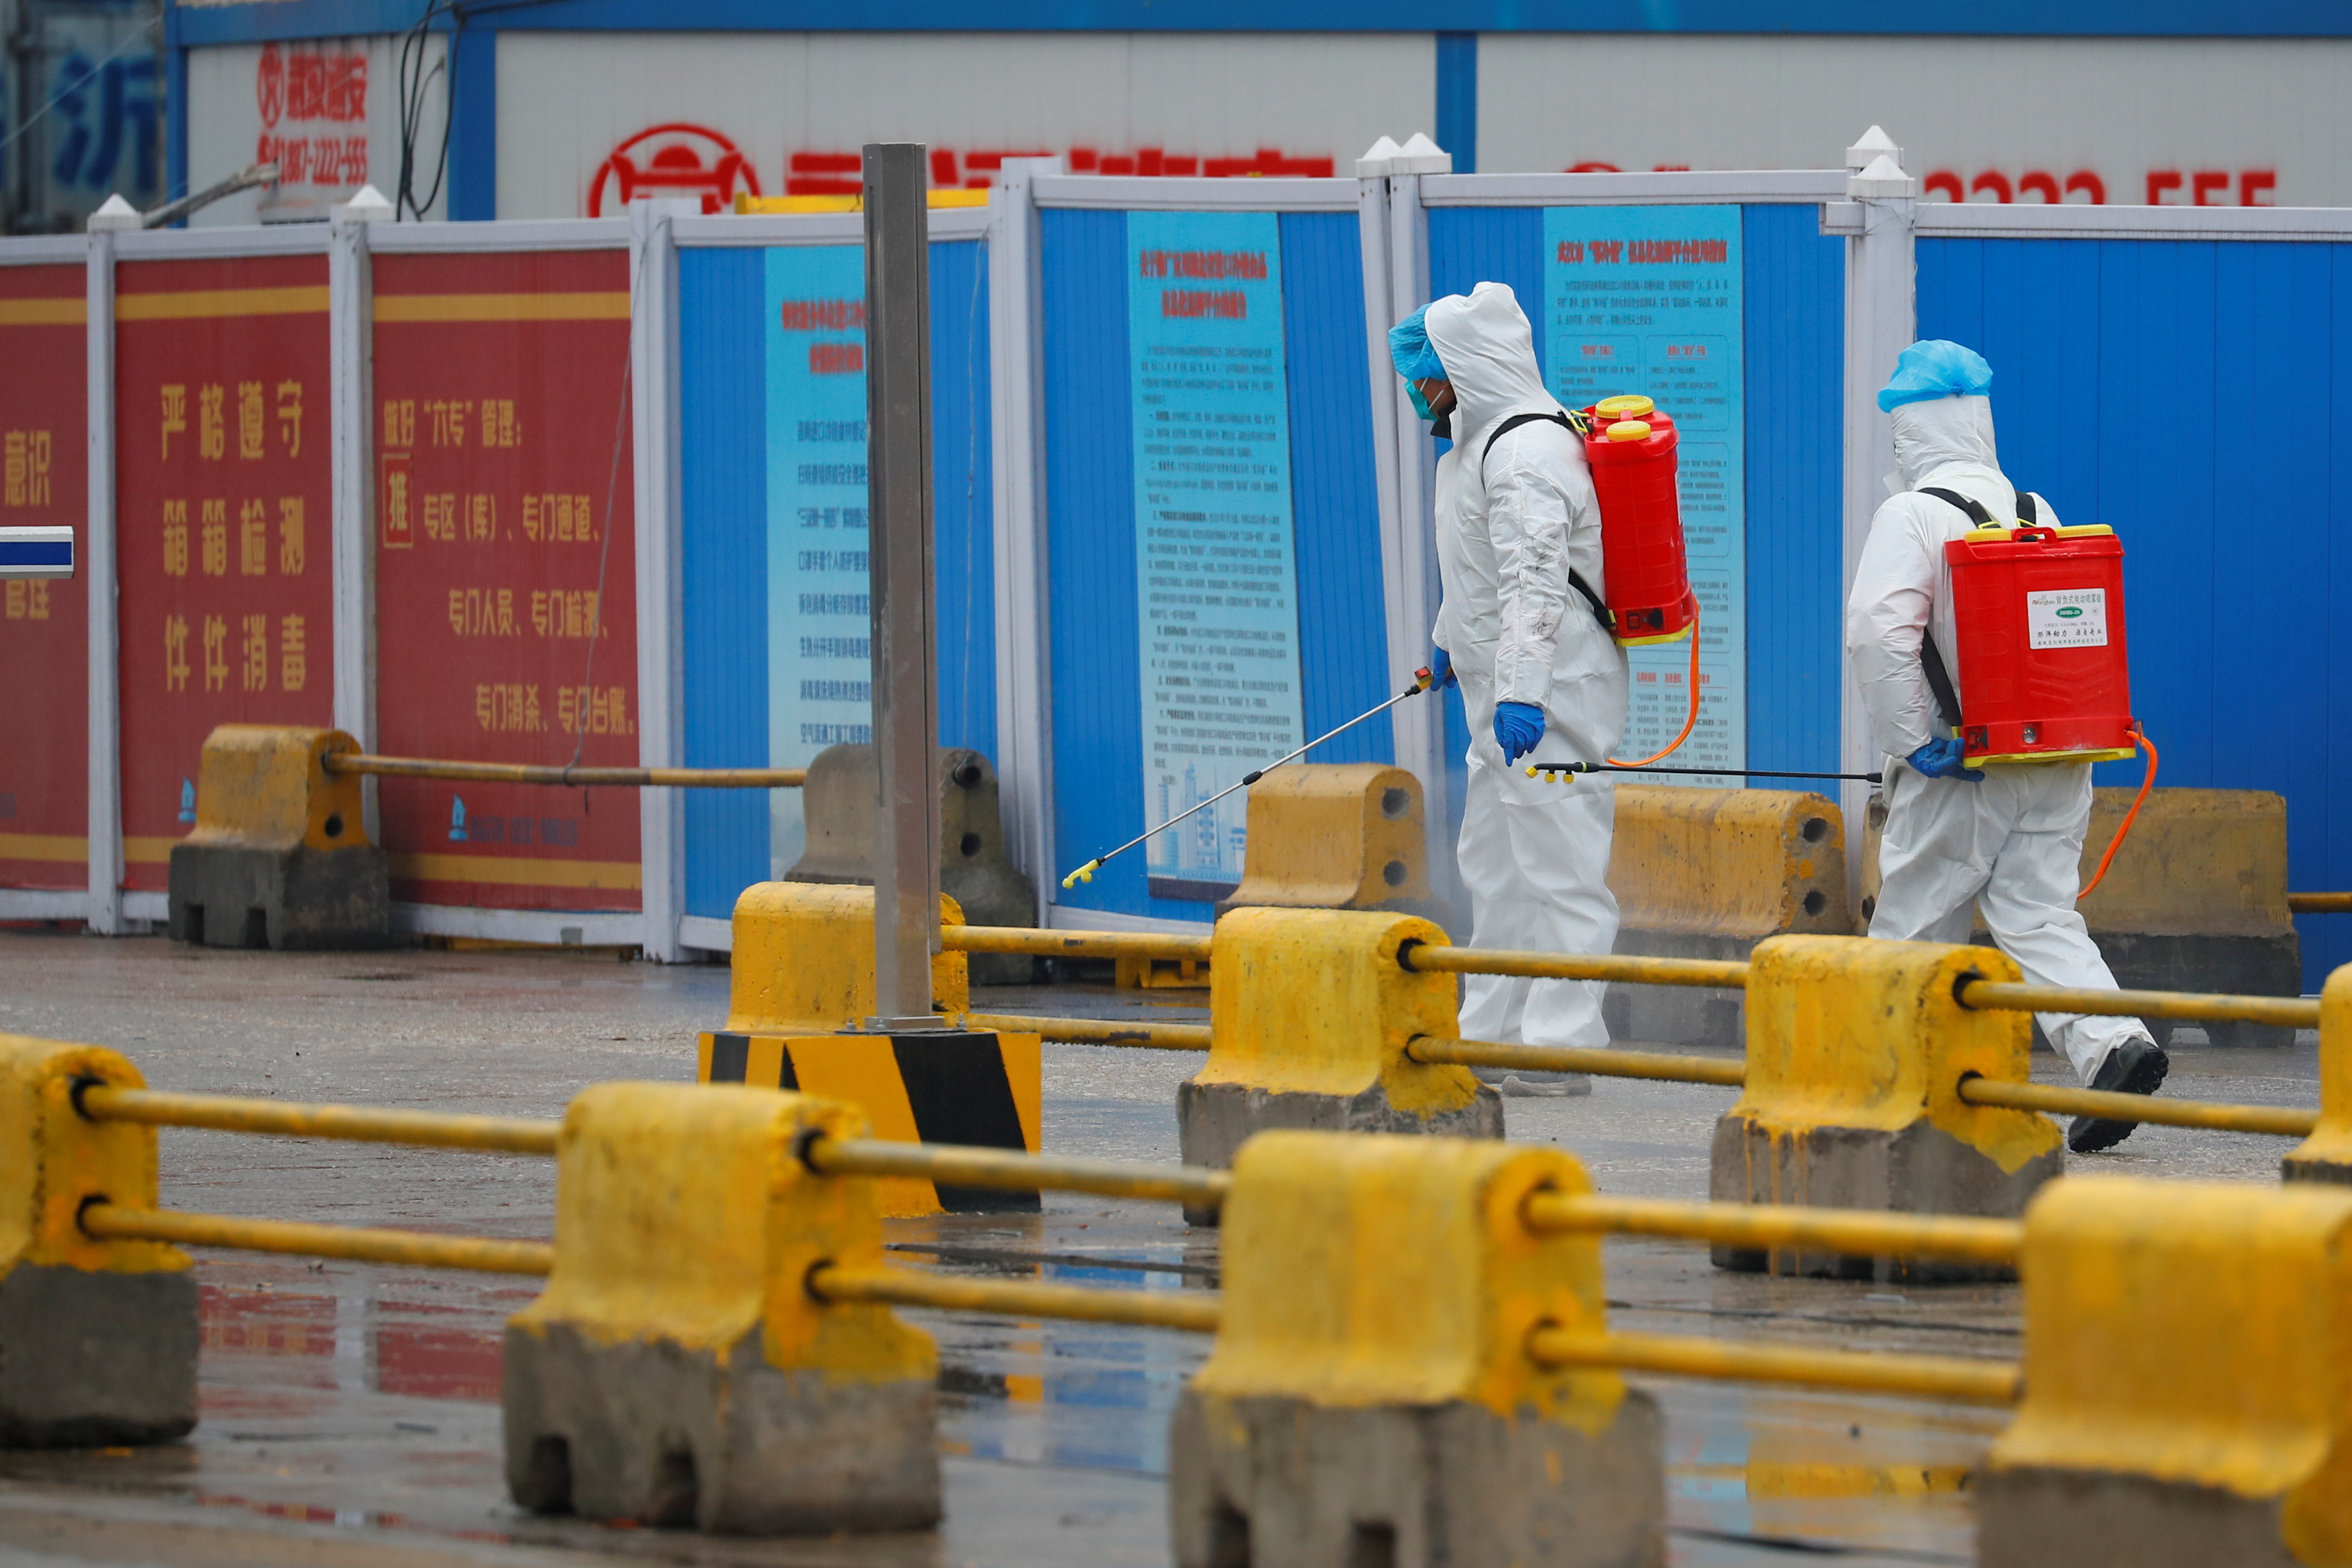 Workers in PPE spray the ground with diinfectant in Baishazhou market during a visit of World Health Organization (WHO) team tasked with investigating the origins of the coronavirus (COVID-19) pandemic, in Wuhan, Hubei province, China, January 31, 2021. REUTERS/Thomas Peter